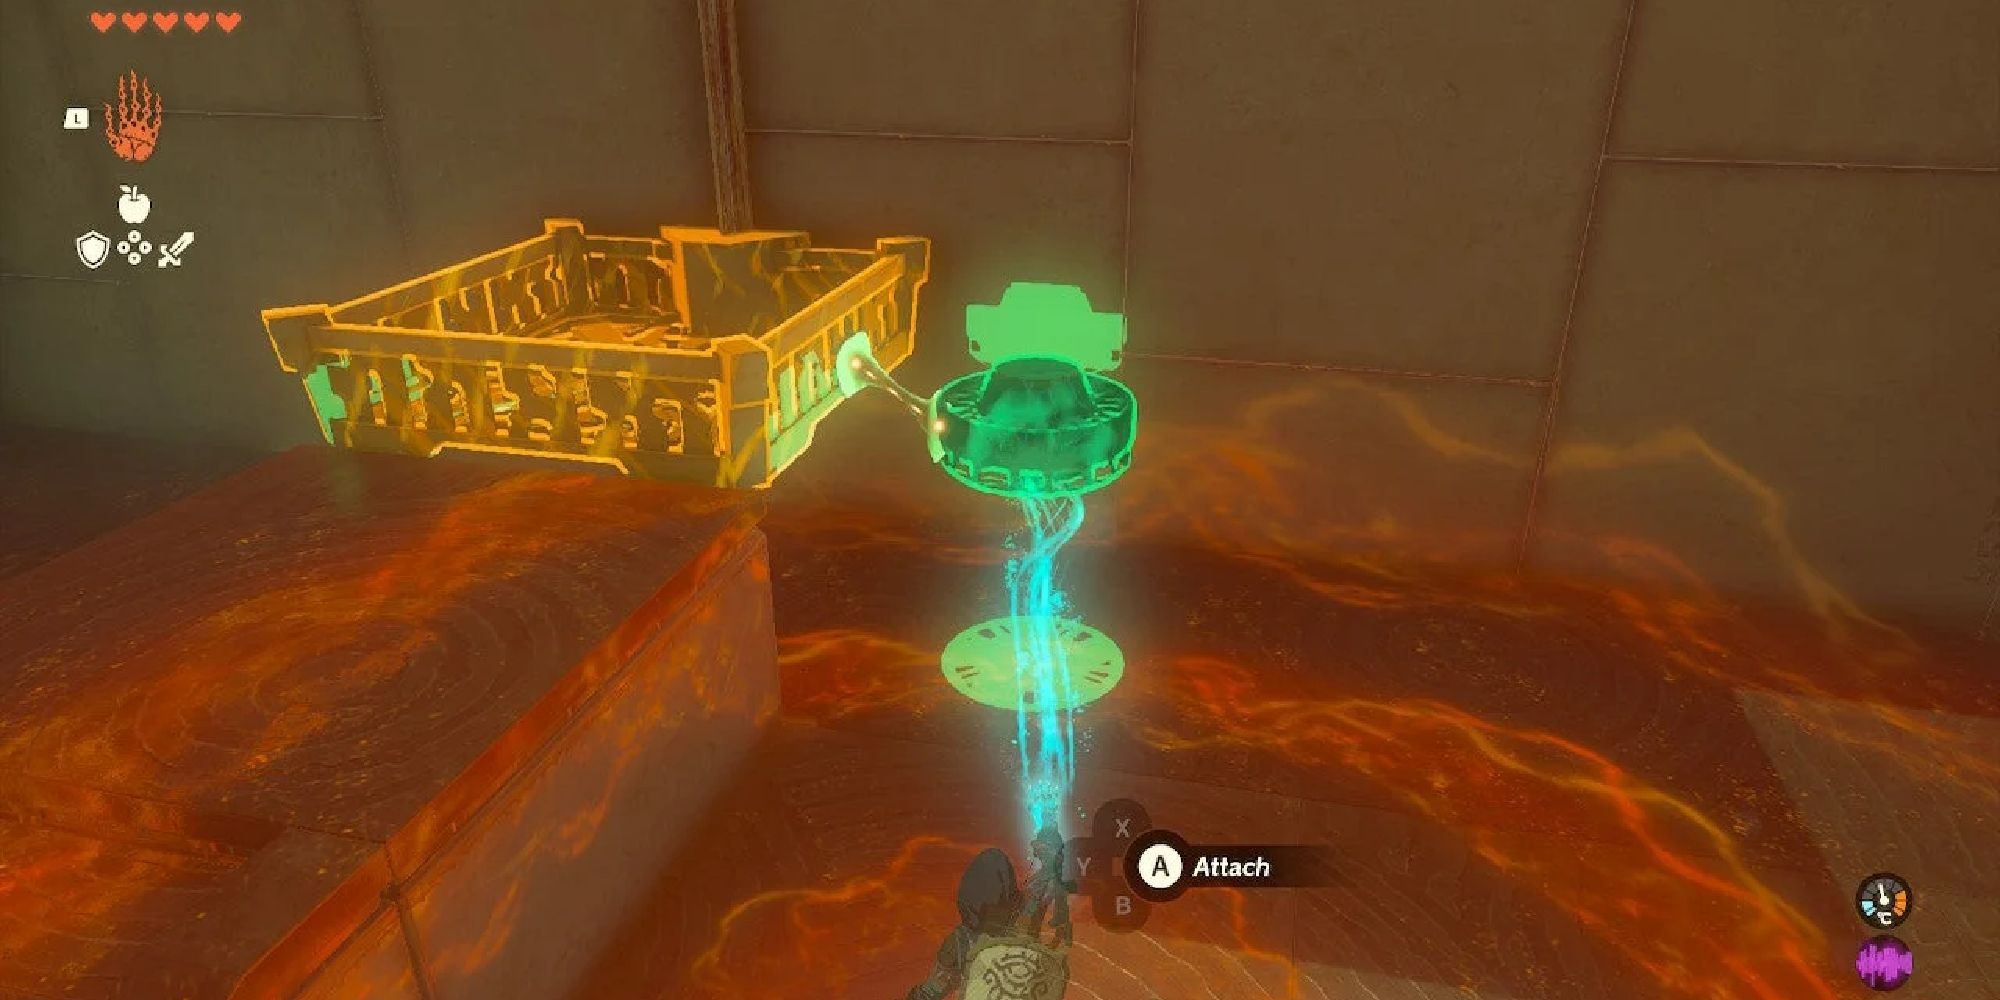 Link attaching a fan to a platform in order to solve the shrine. 